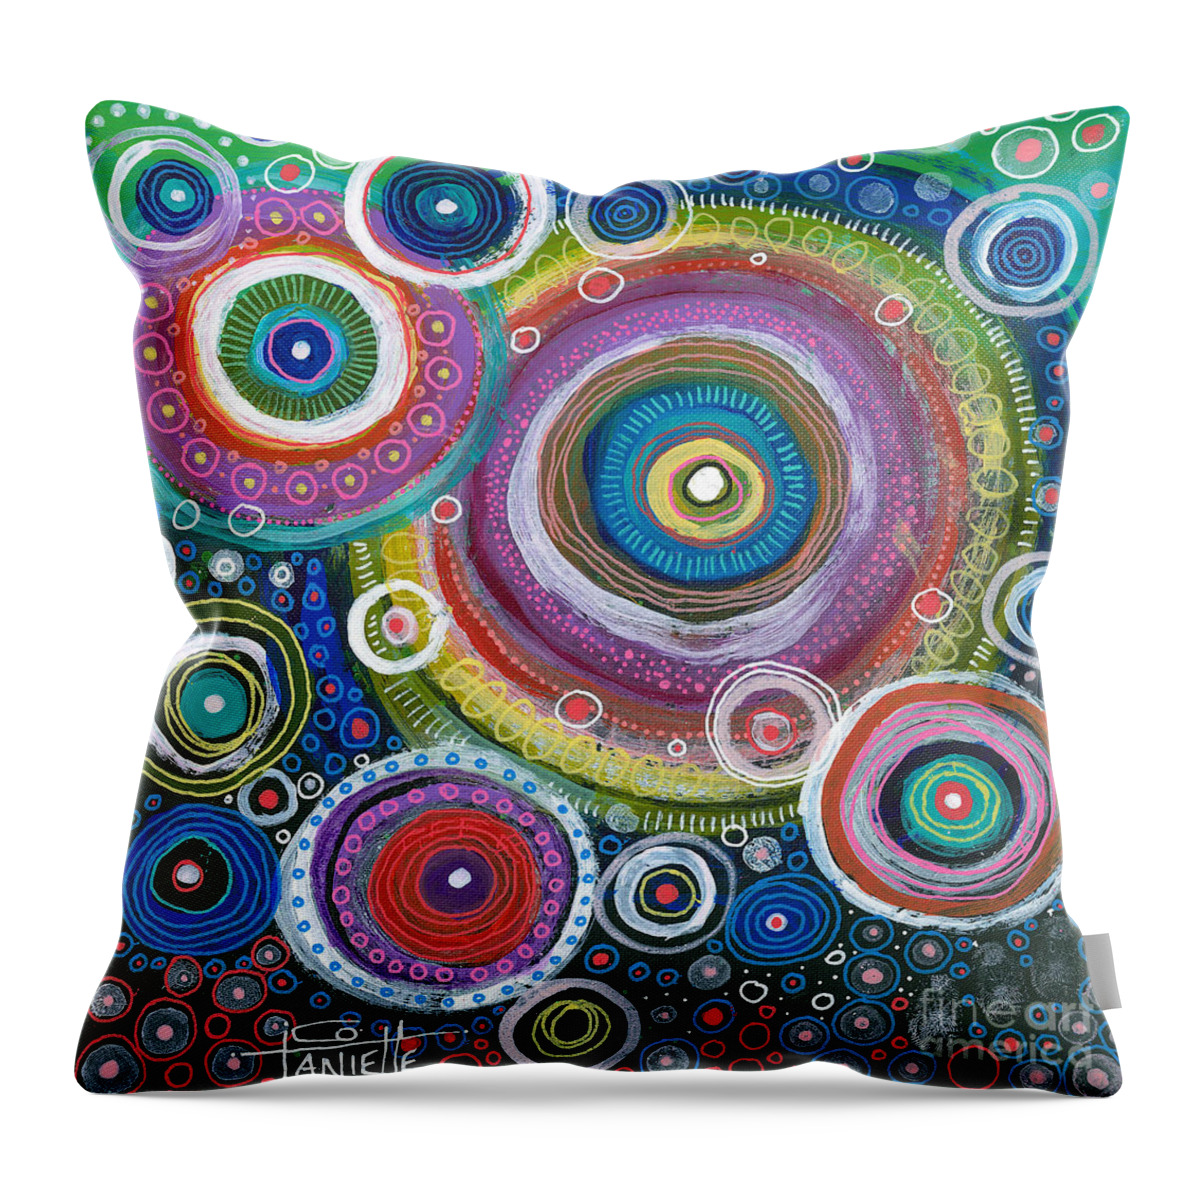 Skipping Stones Throw Pillow featuring the painting Skipping Stones by Tanielle Childers